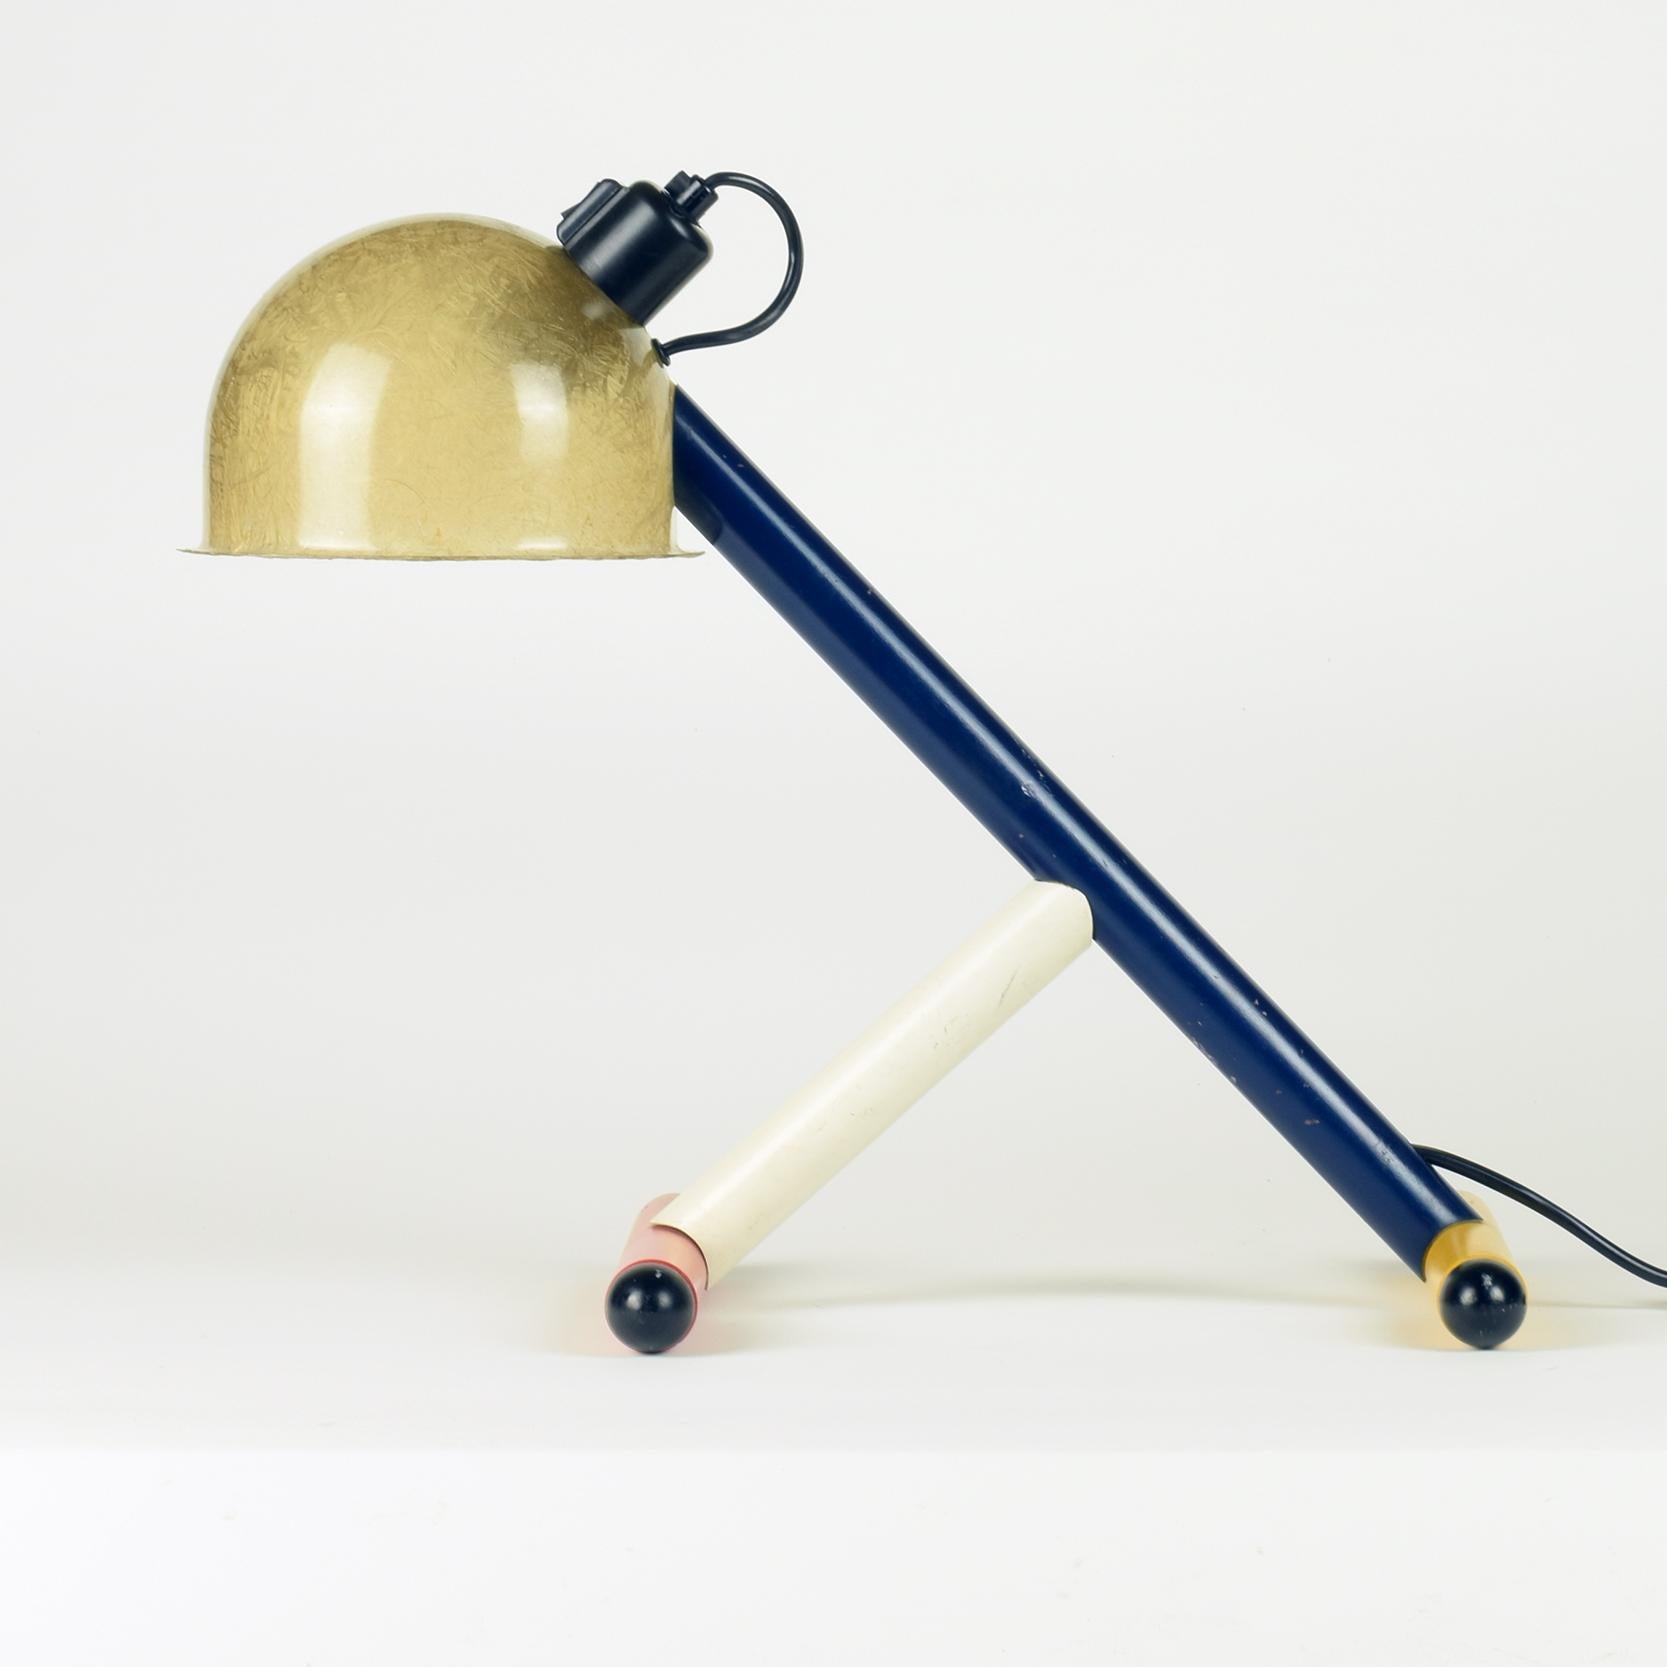 Pop Art table lamp, circa 1970

Wood, lacquered in red, yellow, white and blue. Fiberglass shade with black switchable fitting.
Standard Edison screw-type bulb.

Although un-attributed, we consider this to be an extraordinarily elegant, simple